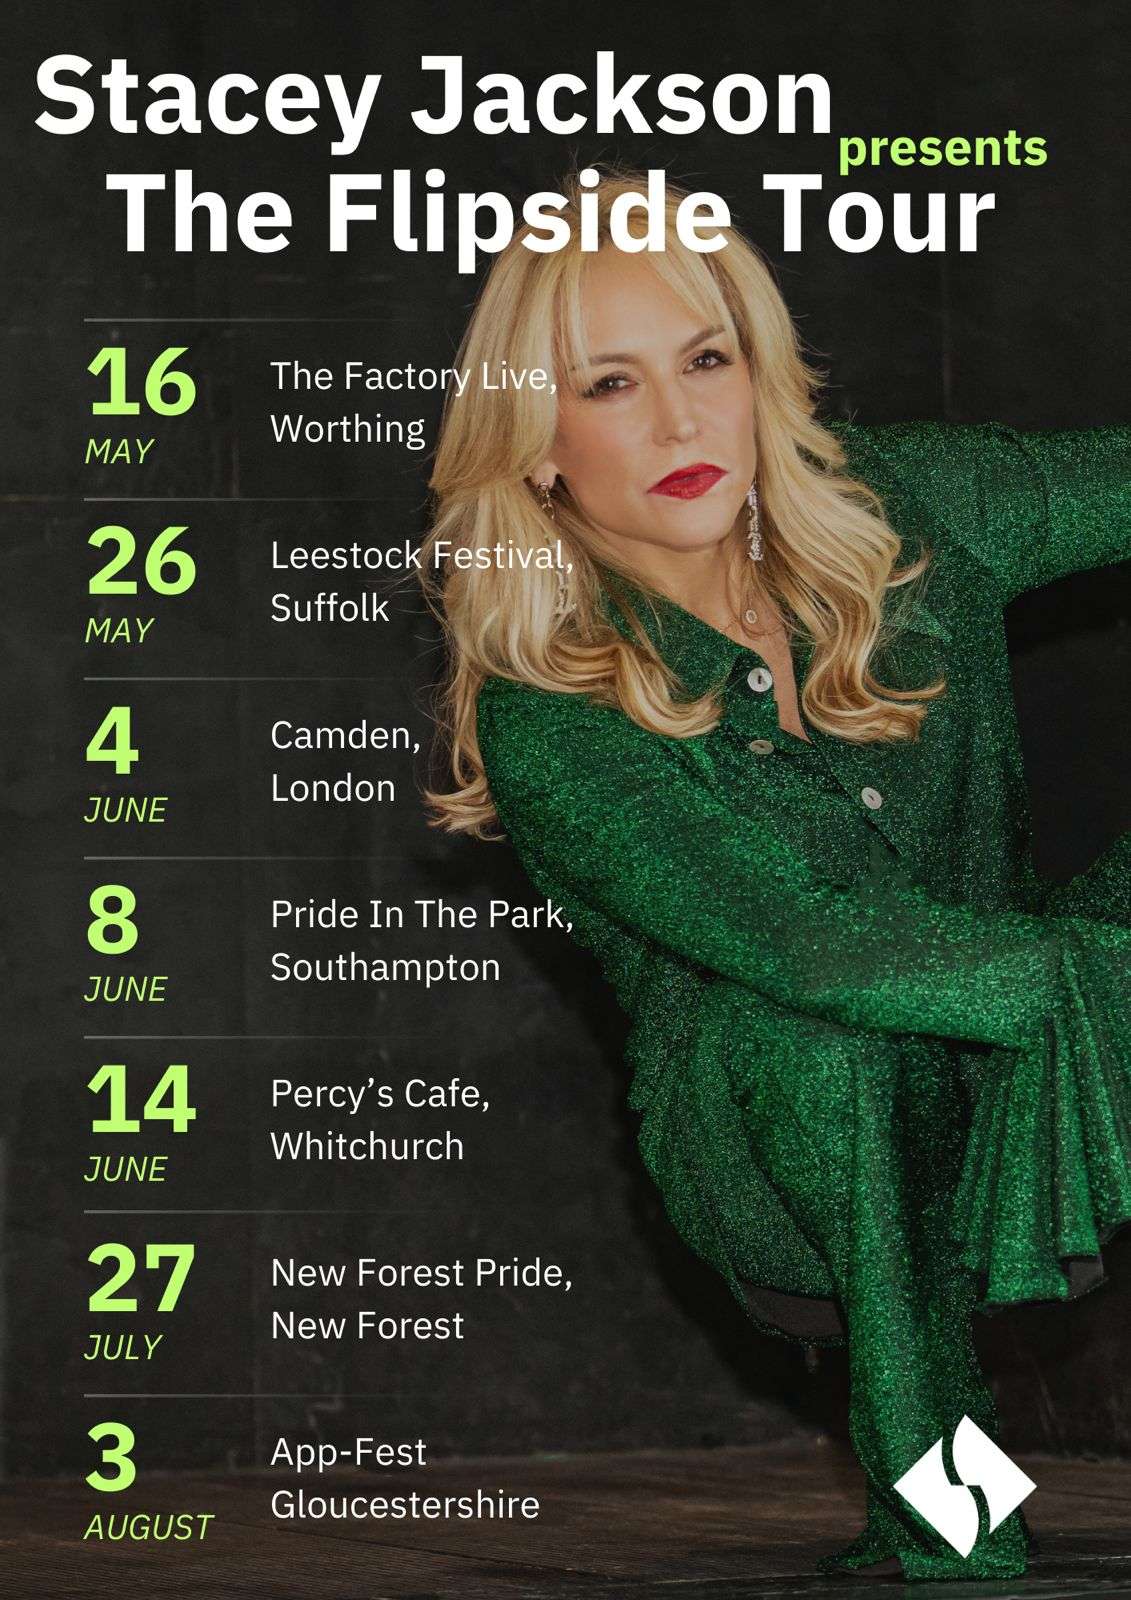 From Chart-Topping Singer to Bestselling Author, Stacey Jackson Tours UK with “Flipside Tour”